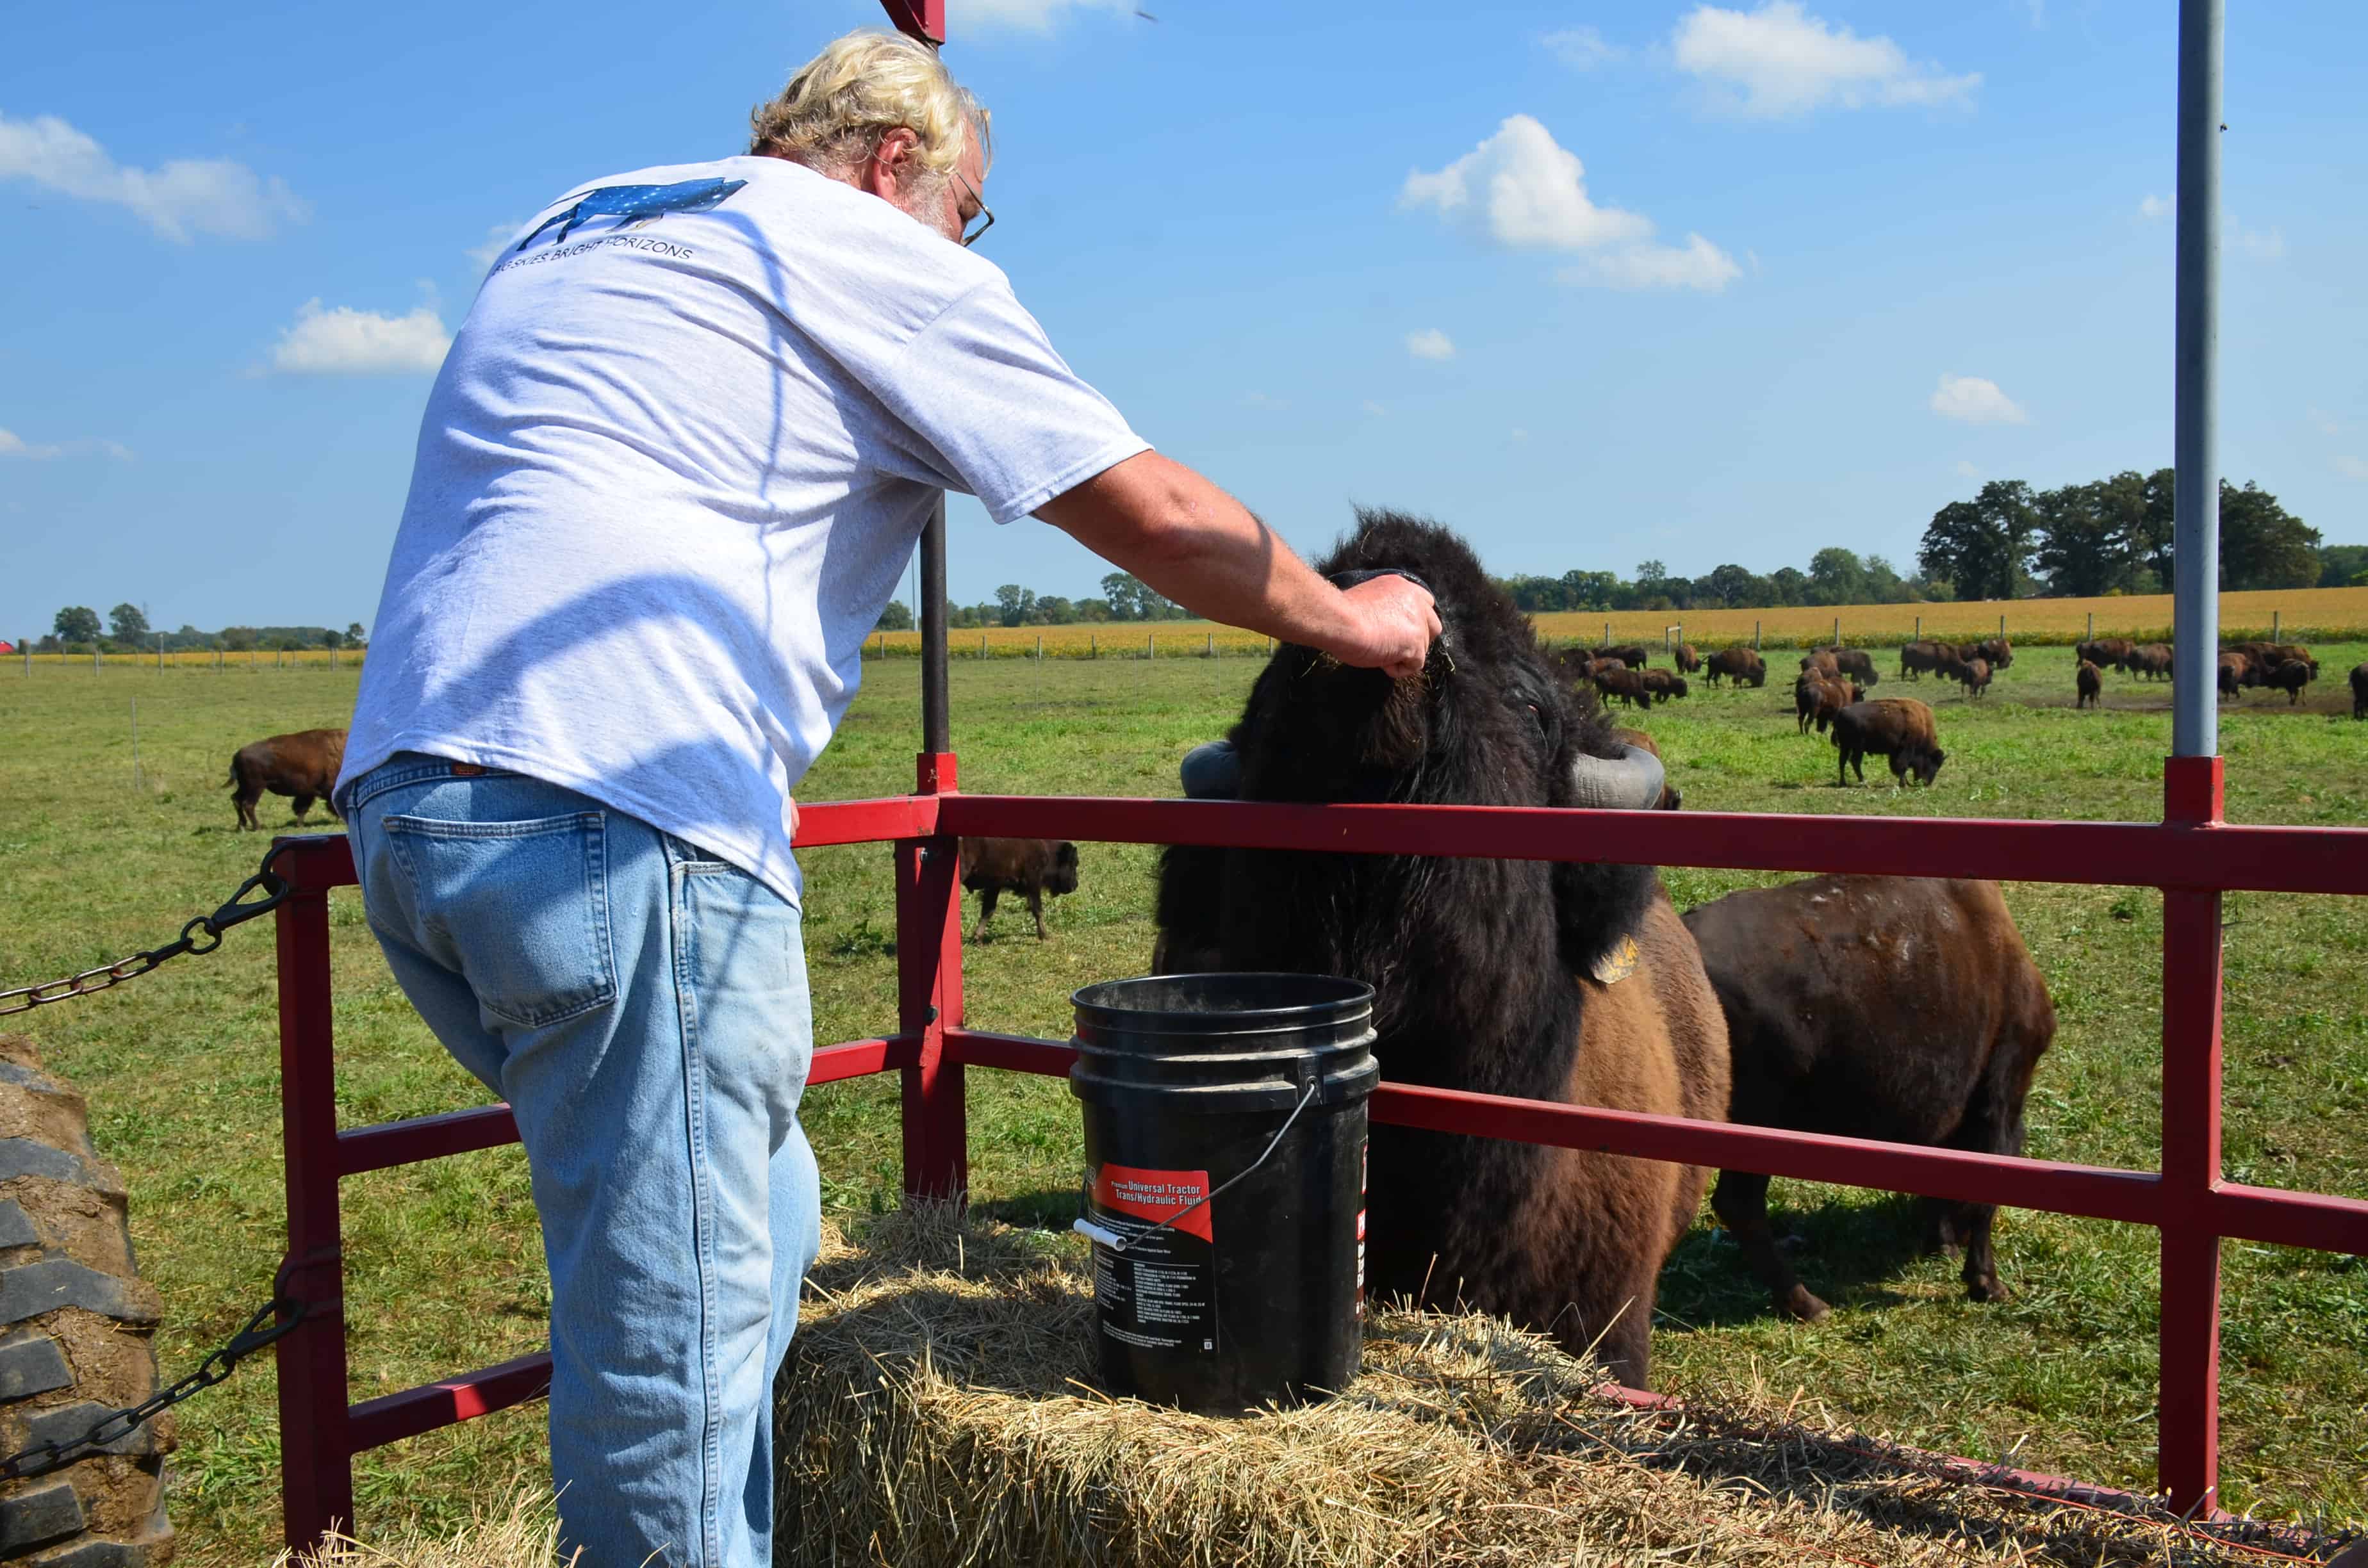 The owner feeding a bison at Broken Wagon Bison in Porter County, Indiana